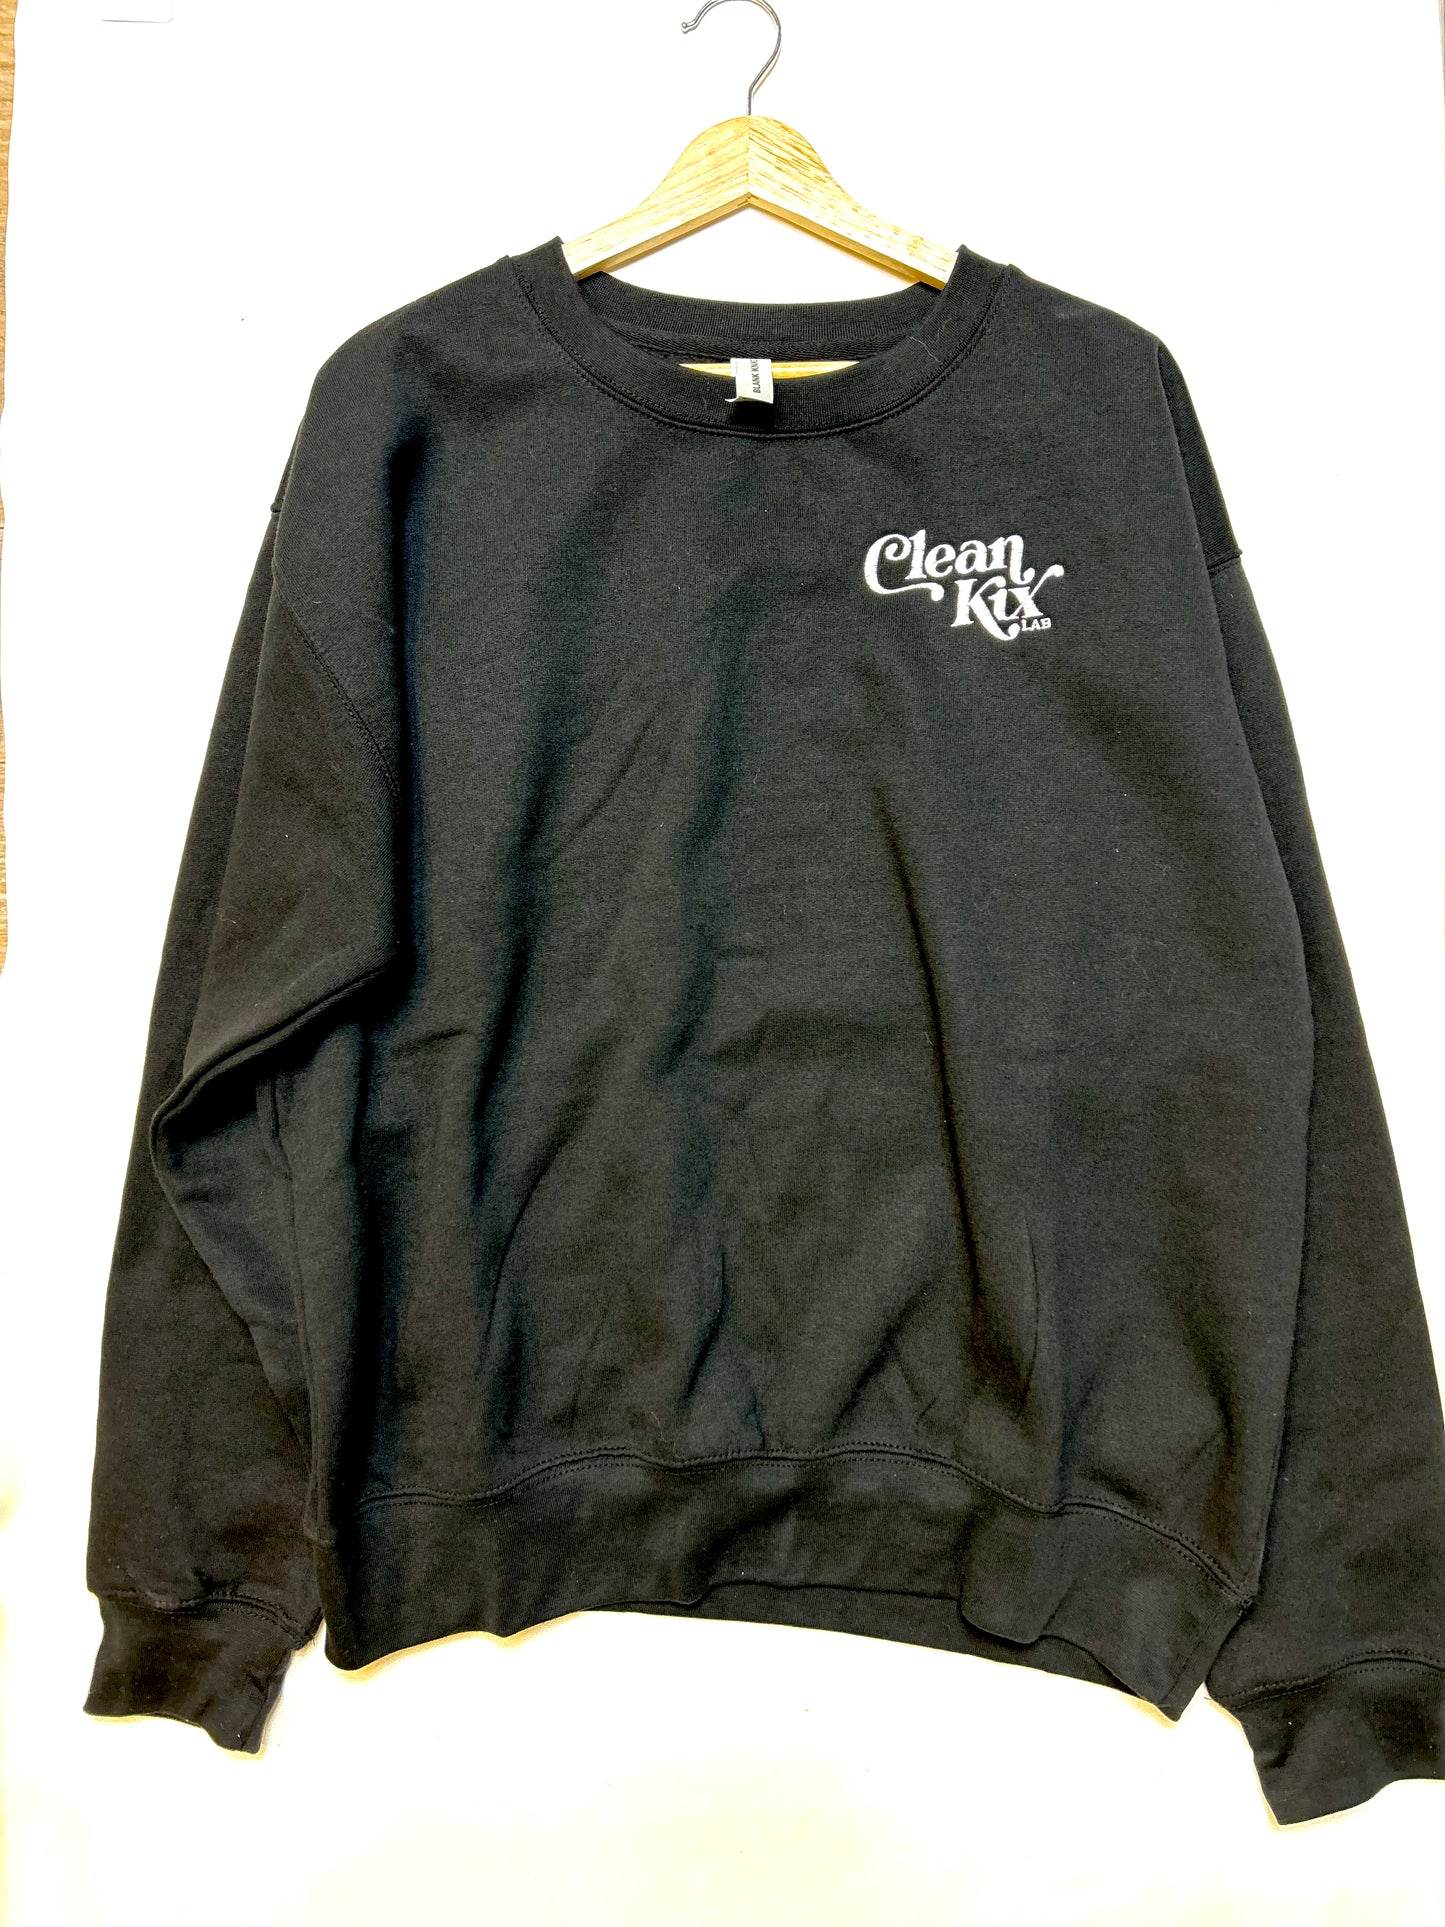 Cleankixlab Embroidered Crewneck